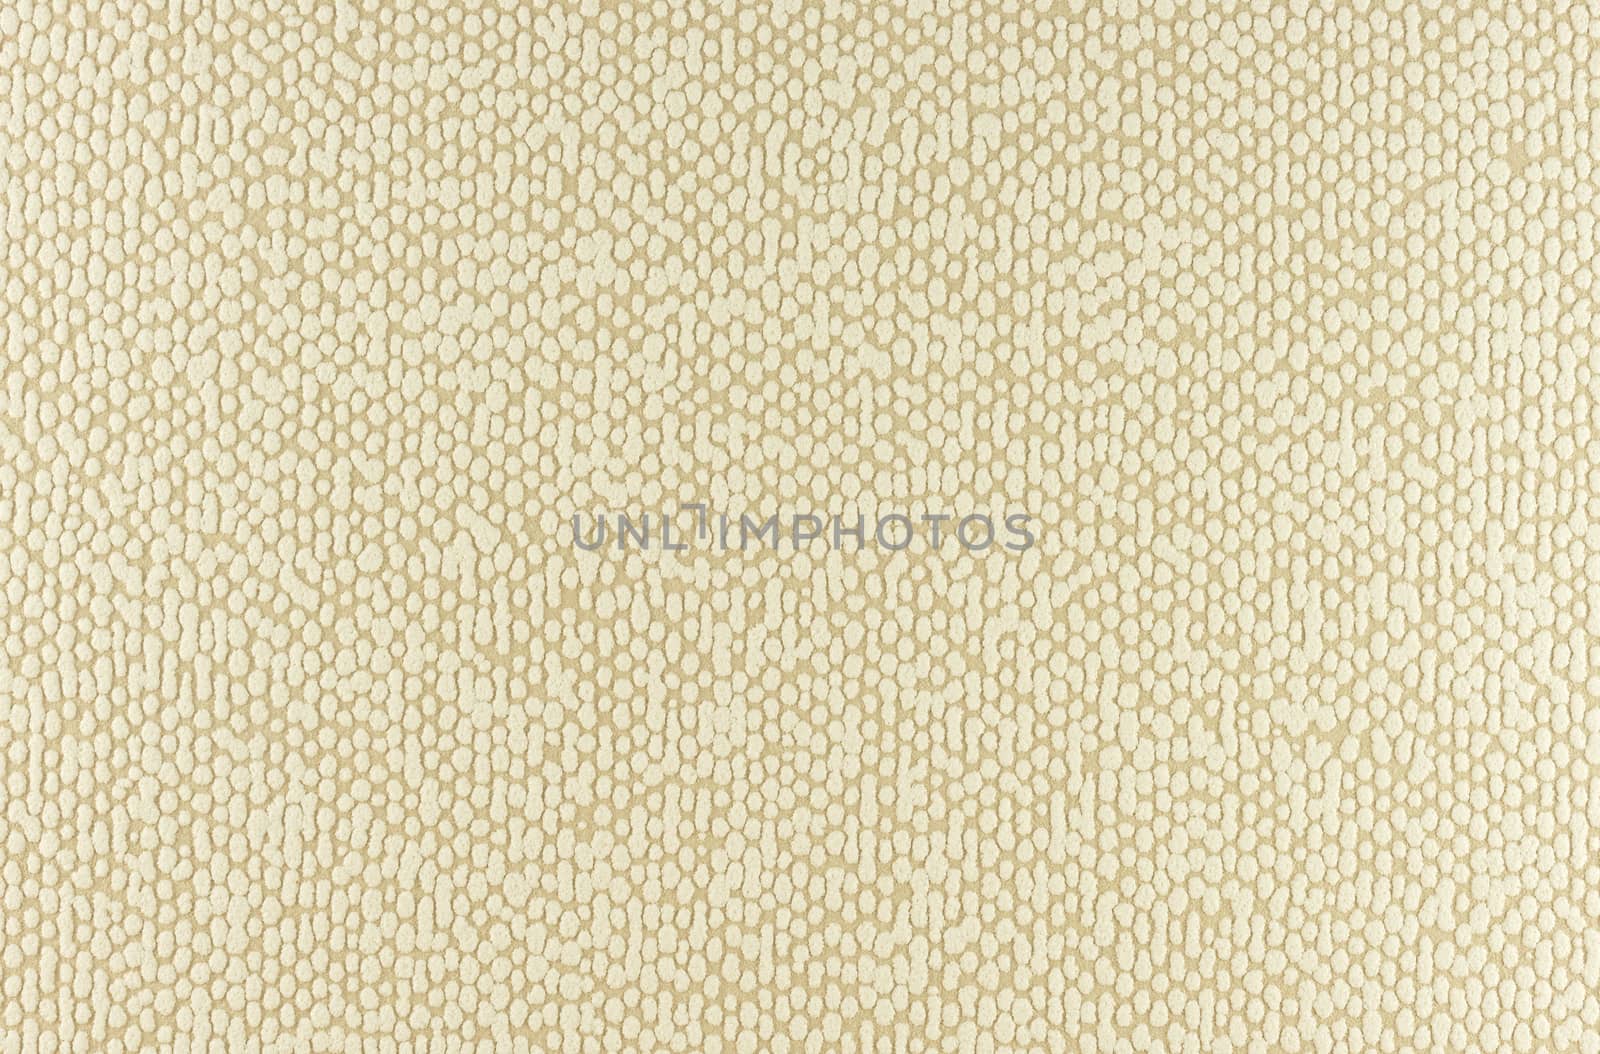 texture on paper background in white and brown dots